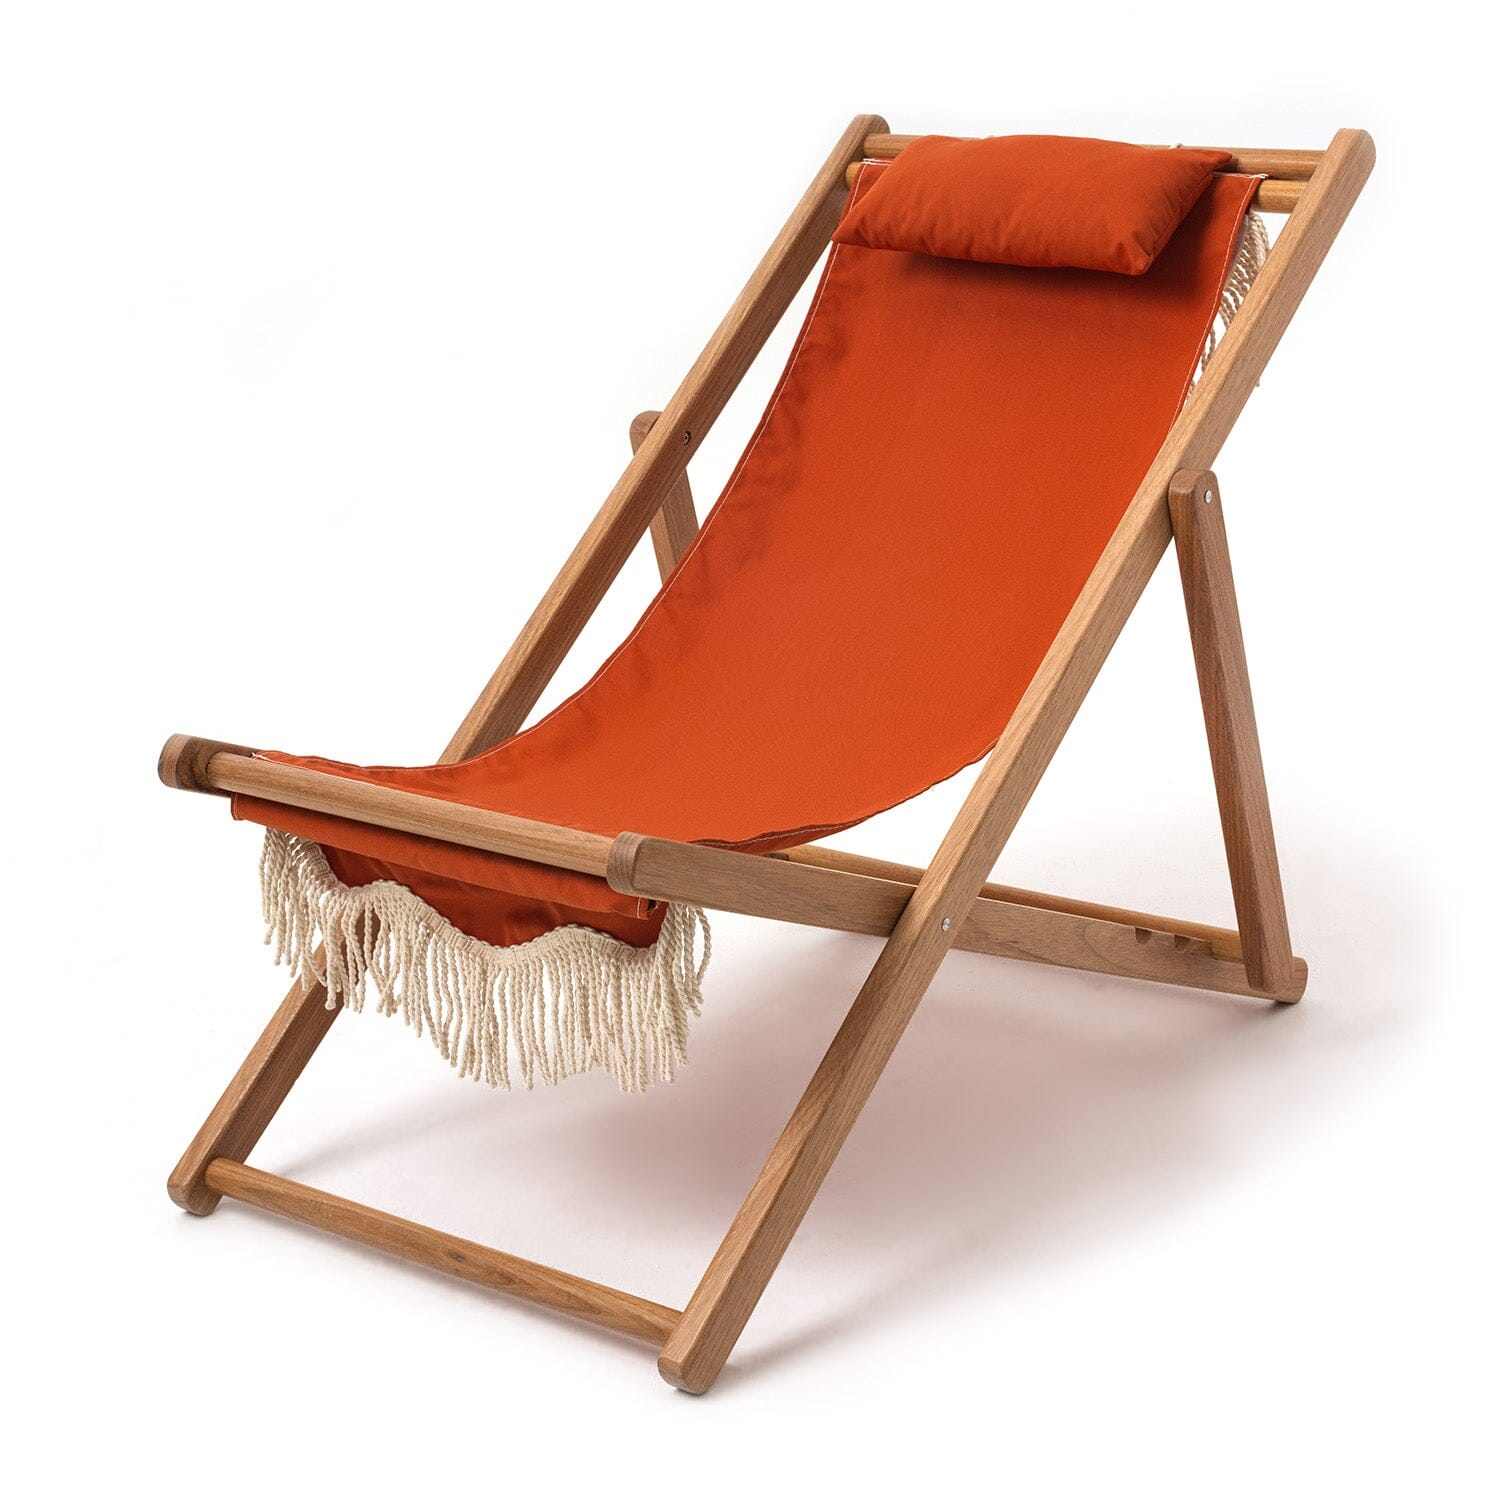 The Sling Chair - Le Sirenuse Sling Chair Business & Pleasure Co 